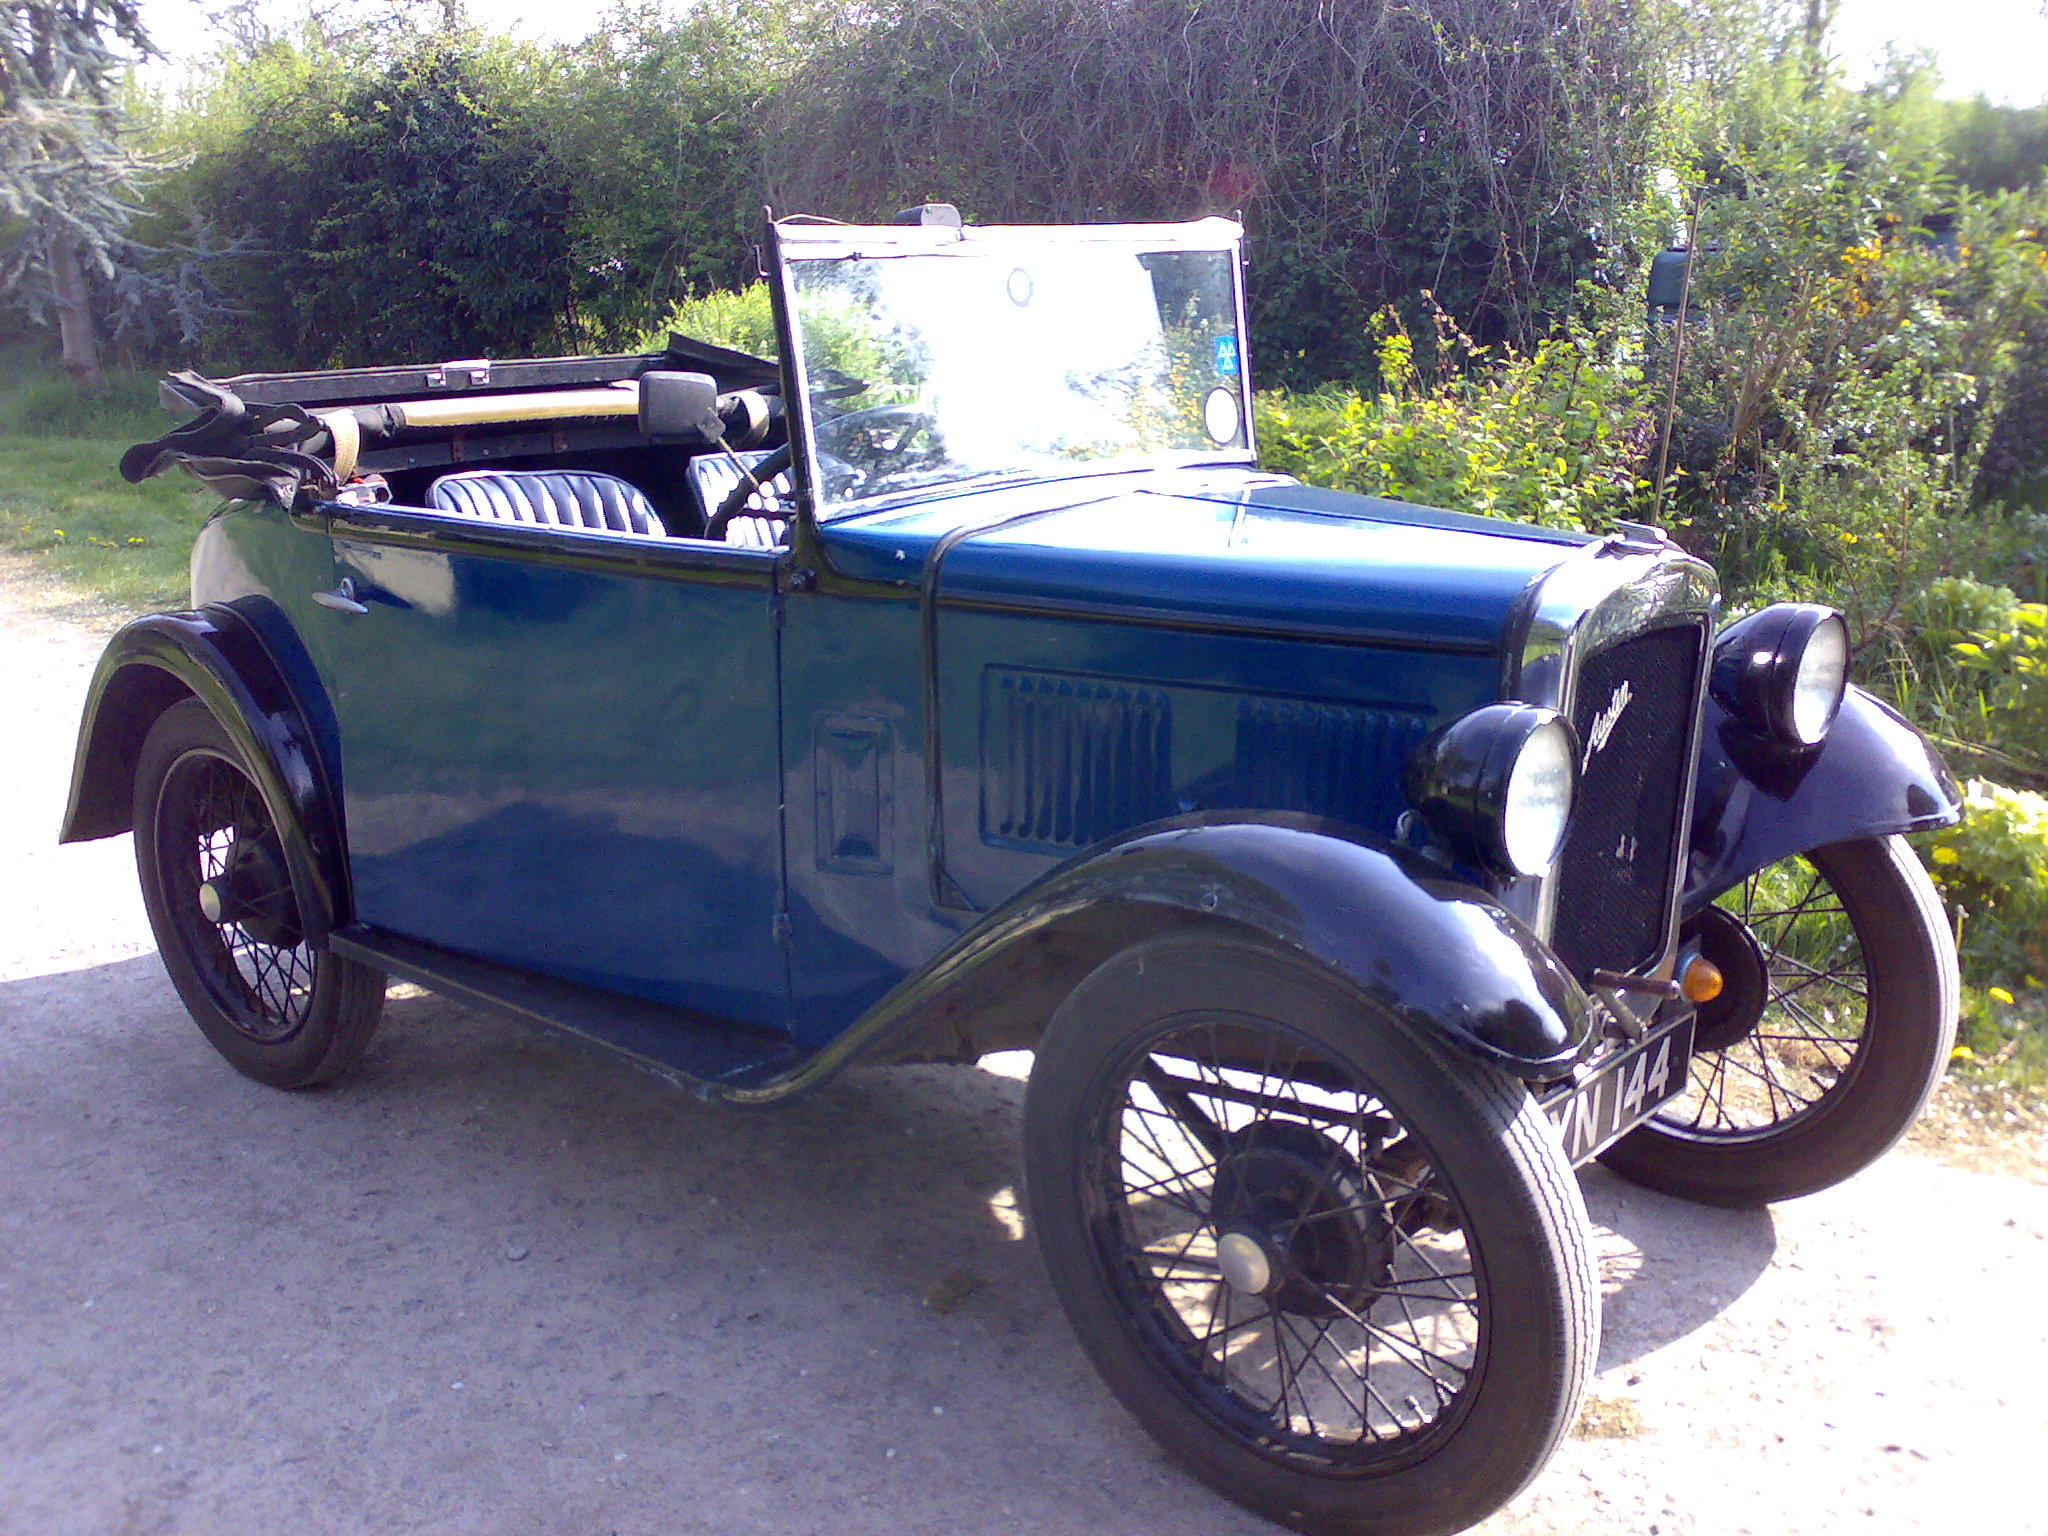 File:1934 Austin 7 two seater.jpg - Wikimedia Commons